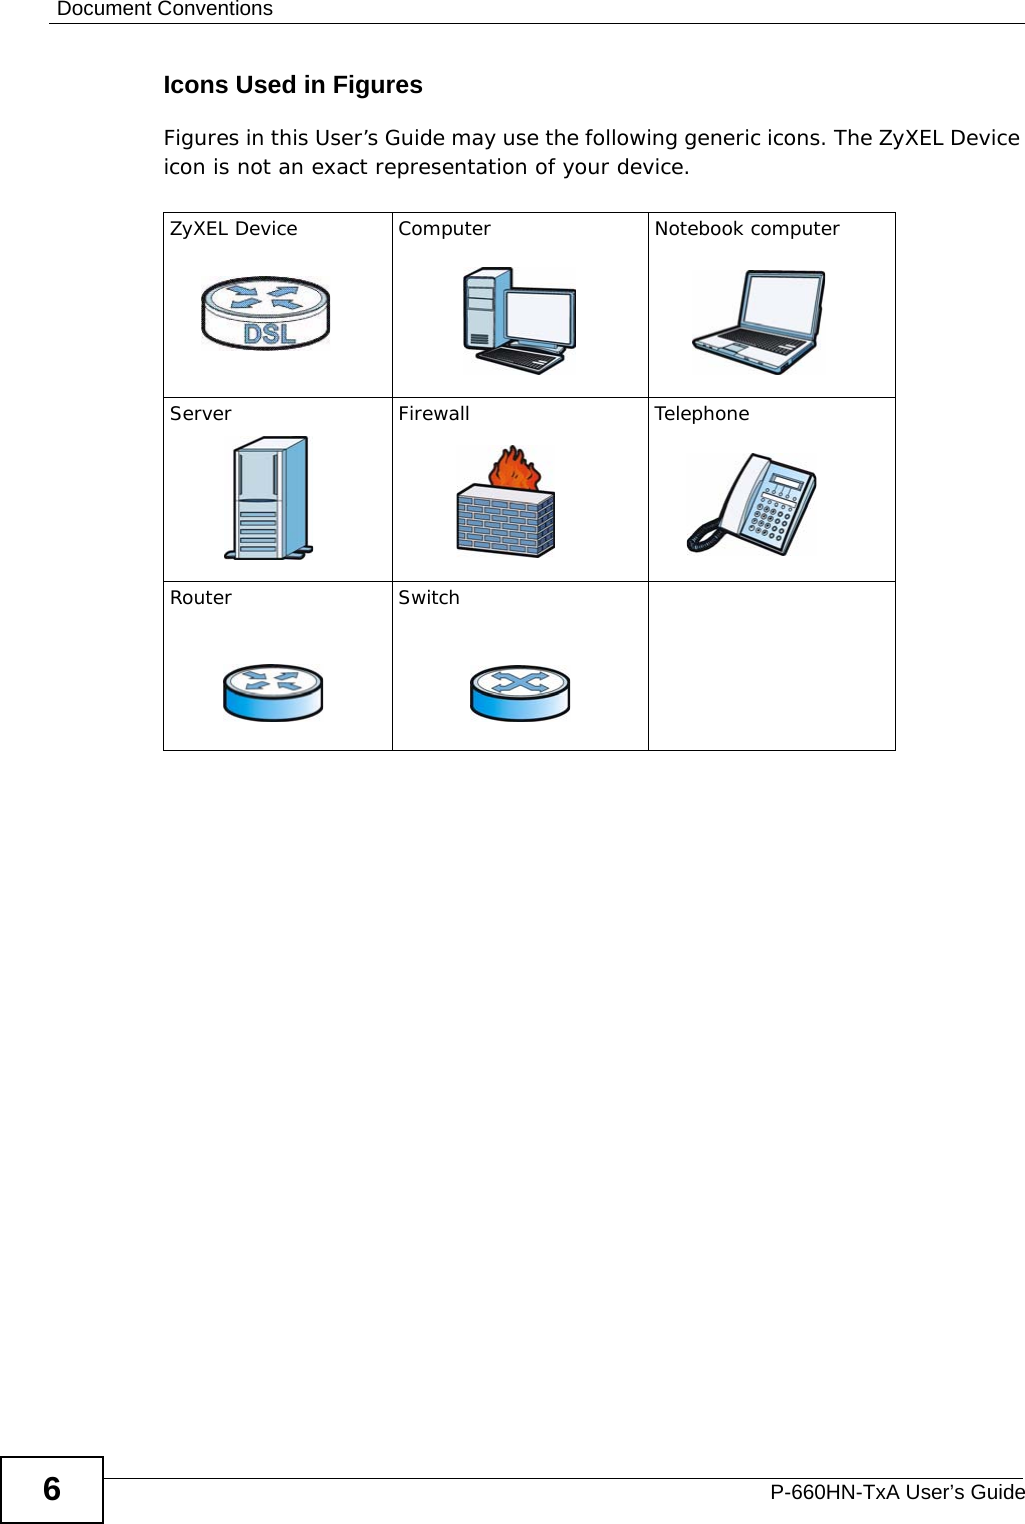 Document ConventionsP-660HN-TxA User’s Guide6Icons Used in FiguresFigures in this User’s Guide may use the following generic icons. The ZyXEL Device icon is not an exact representation of your device.ZyXEL Device Computer Notebook computerServer Firewall TelephoneRouter Switch